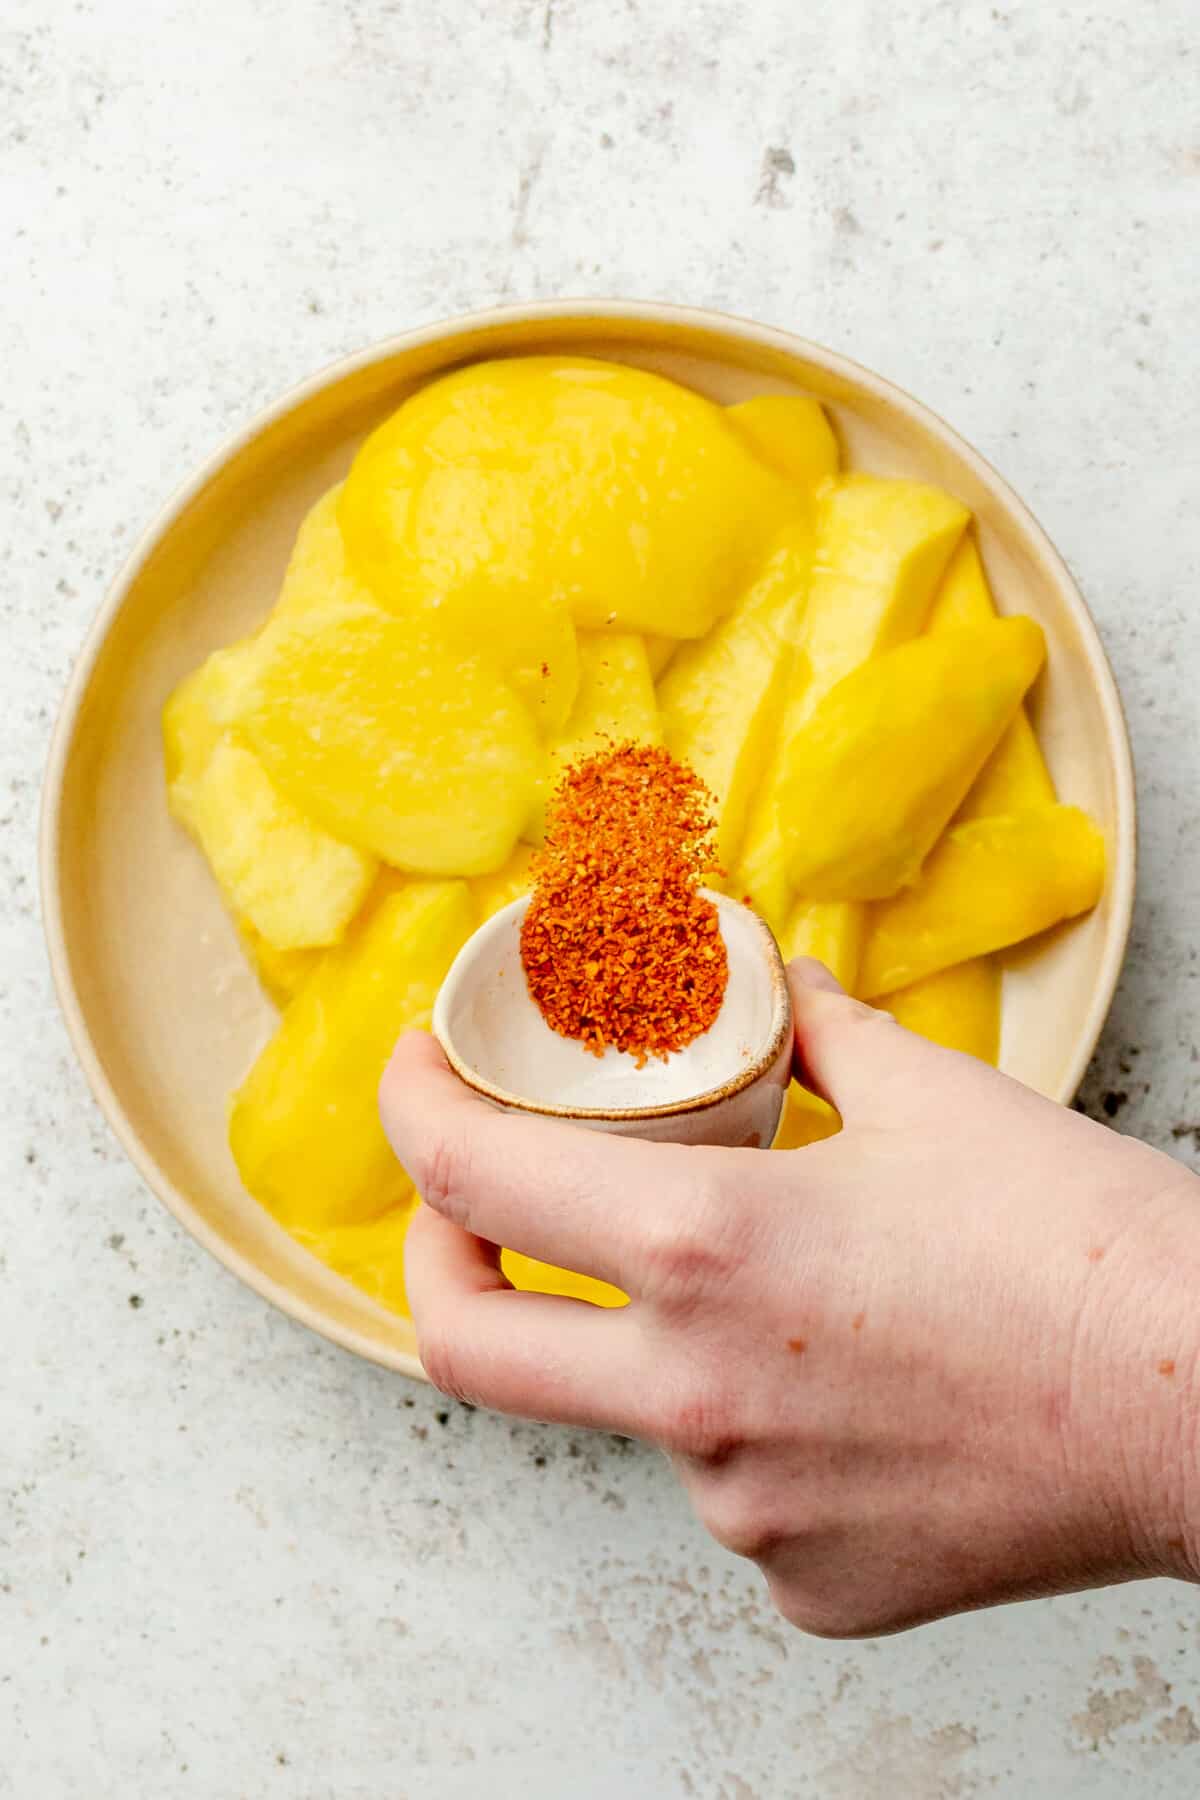 Slices of mango sitting in a shallow bowl have chili tossed over whilst sitting on a light grey colored surface.